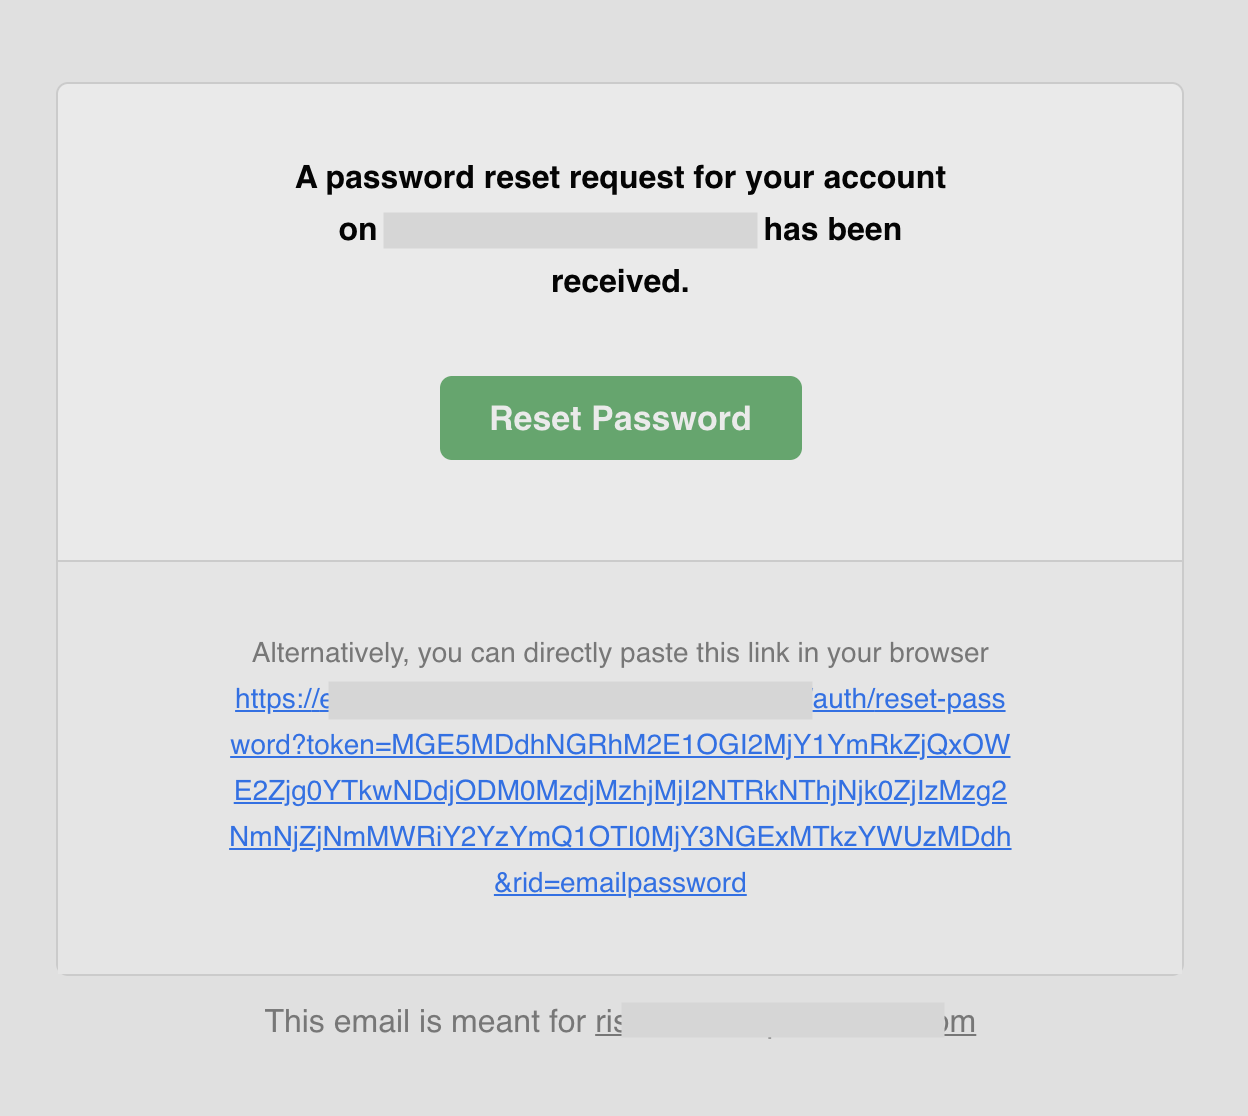 Email UI for password reset email